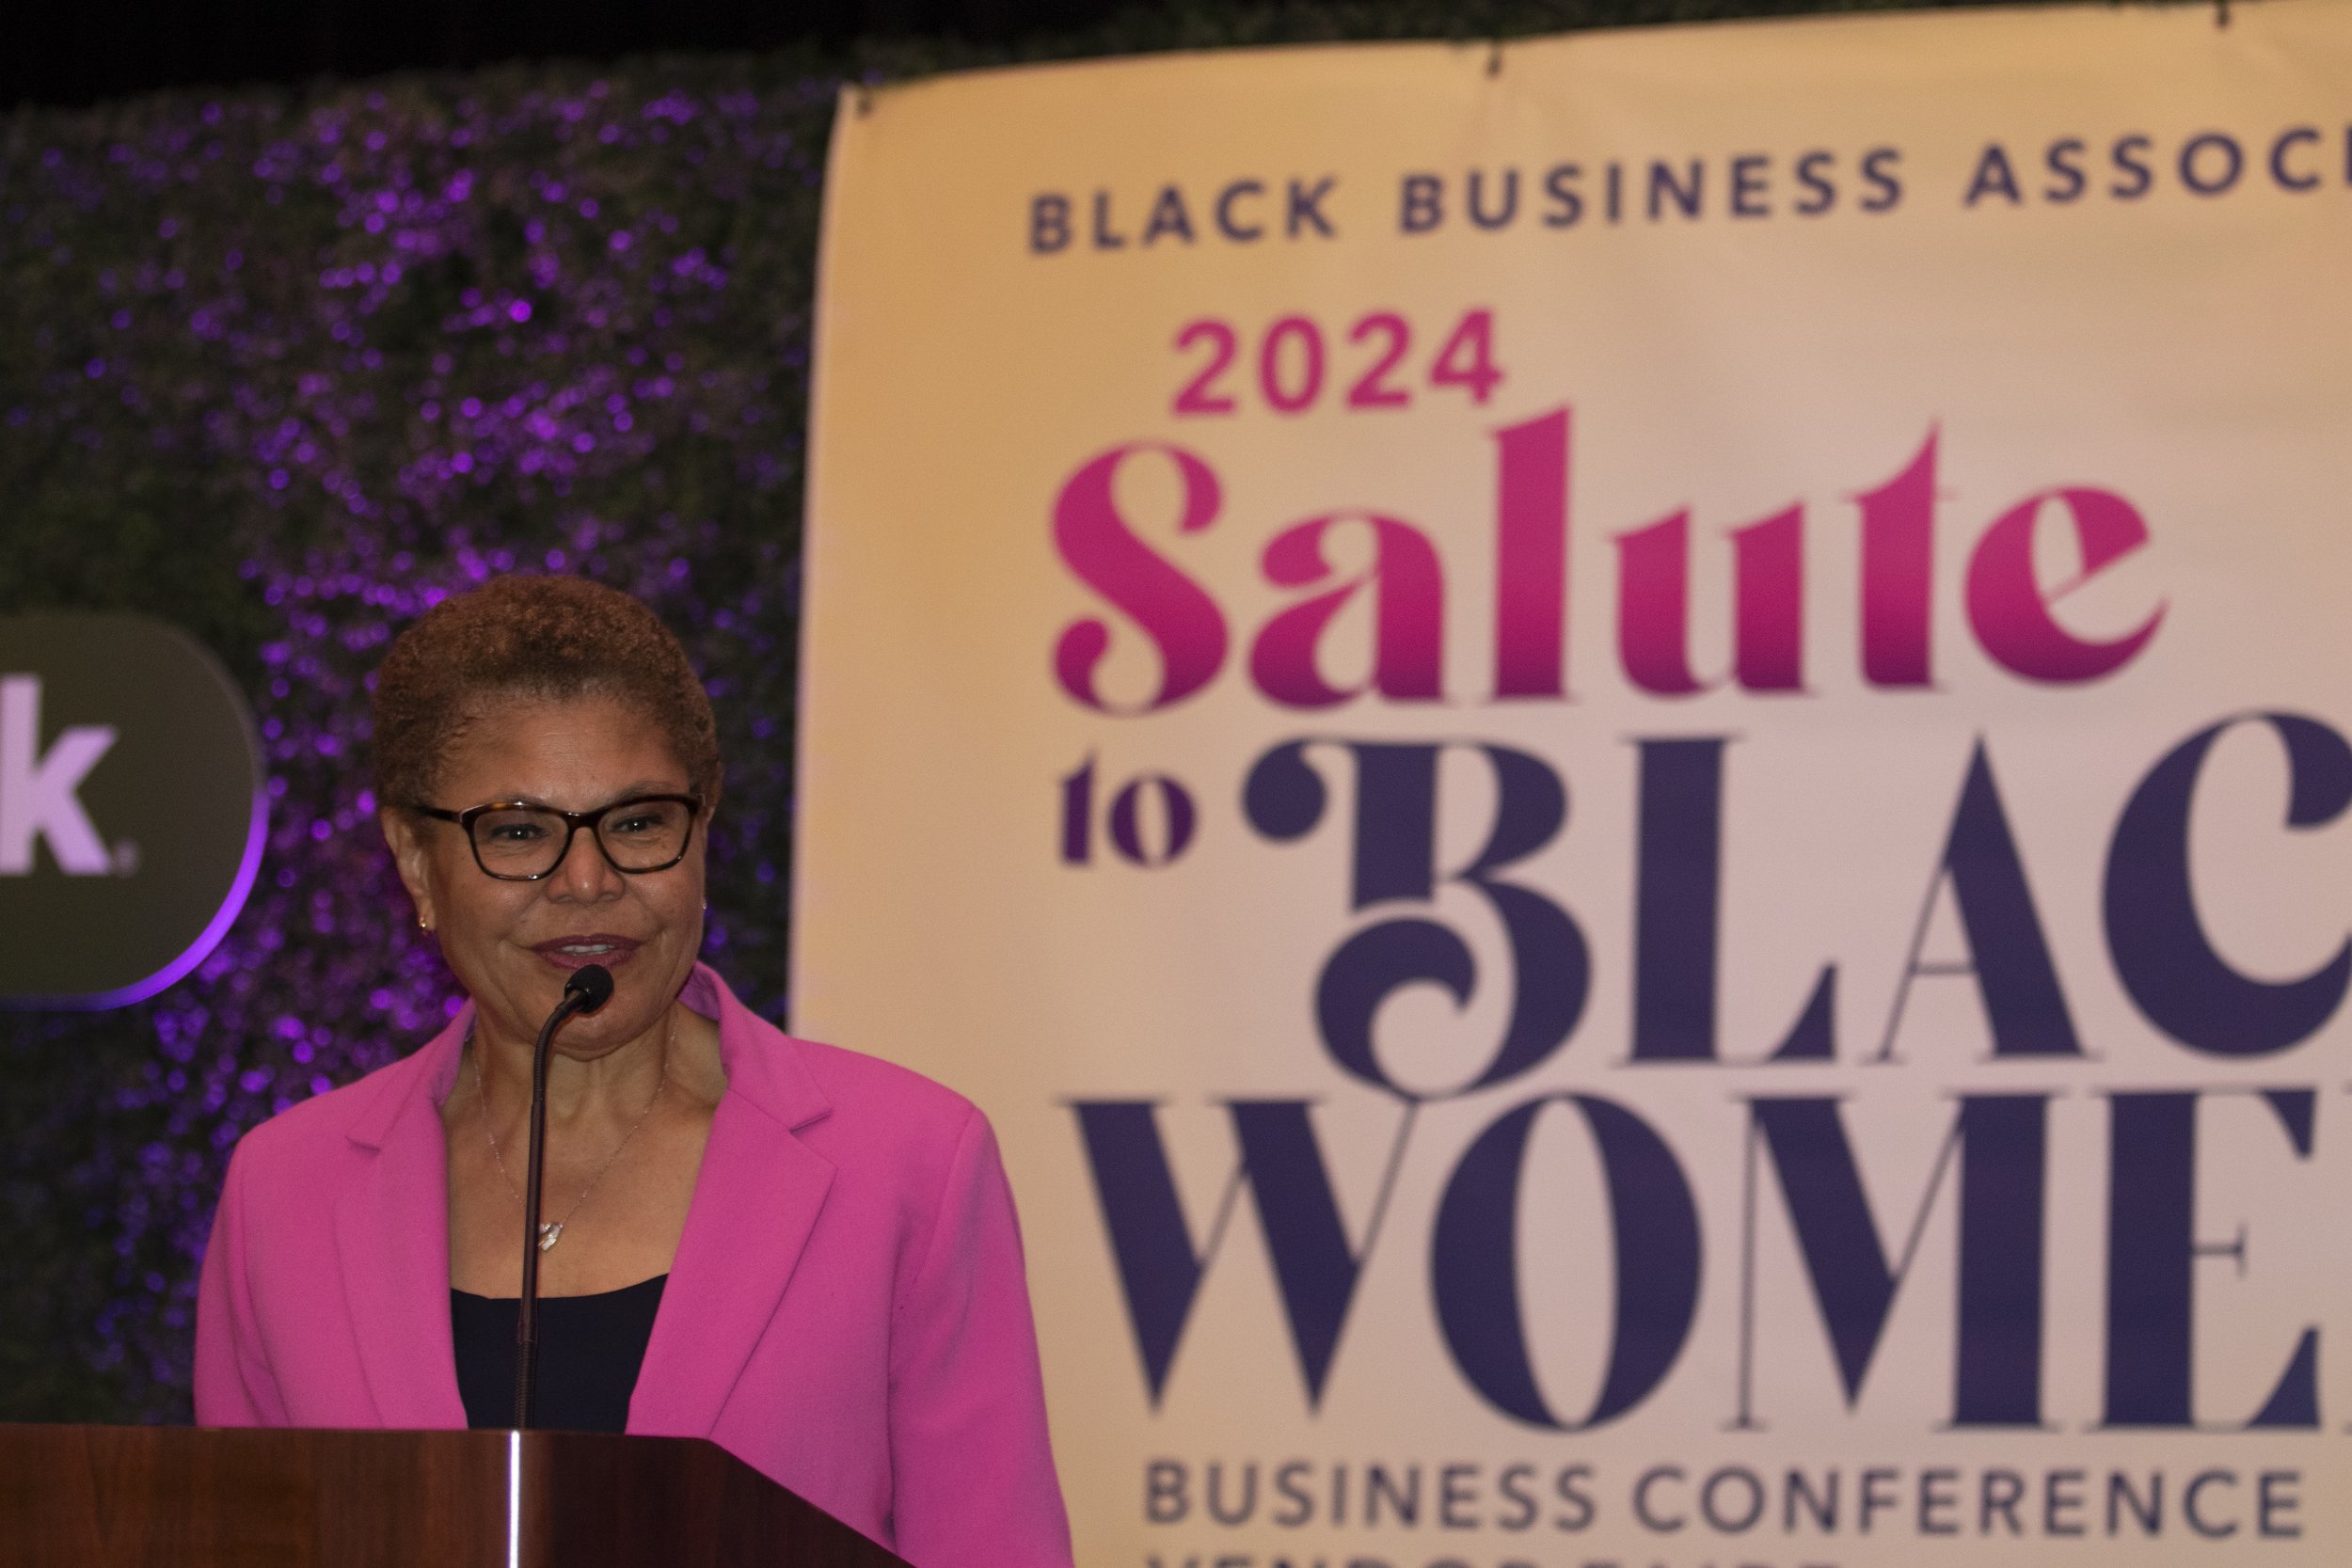  Mayor Karen Bass gives a speech at the Black Business Association event in Inglewood, Calif., on March 23, 2024.  (Corsair Photo: Luca Martinez) 